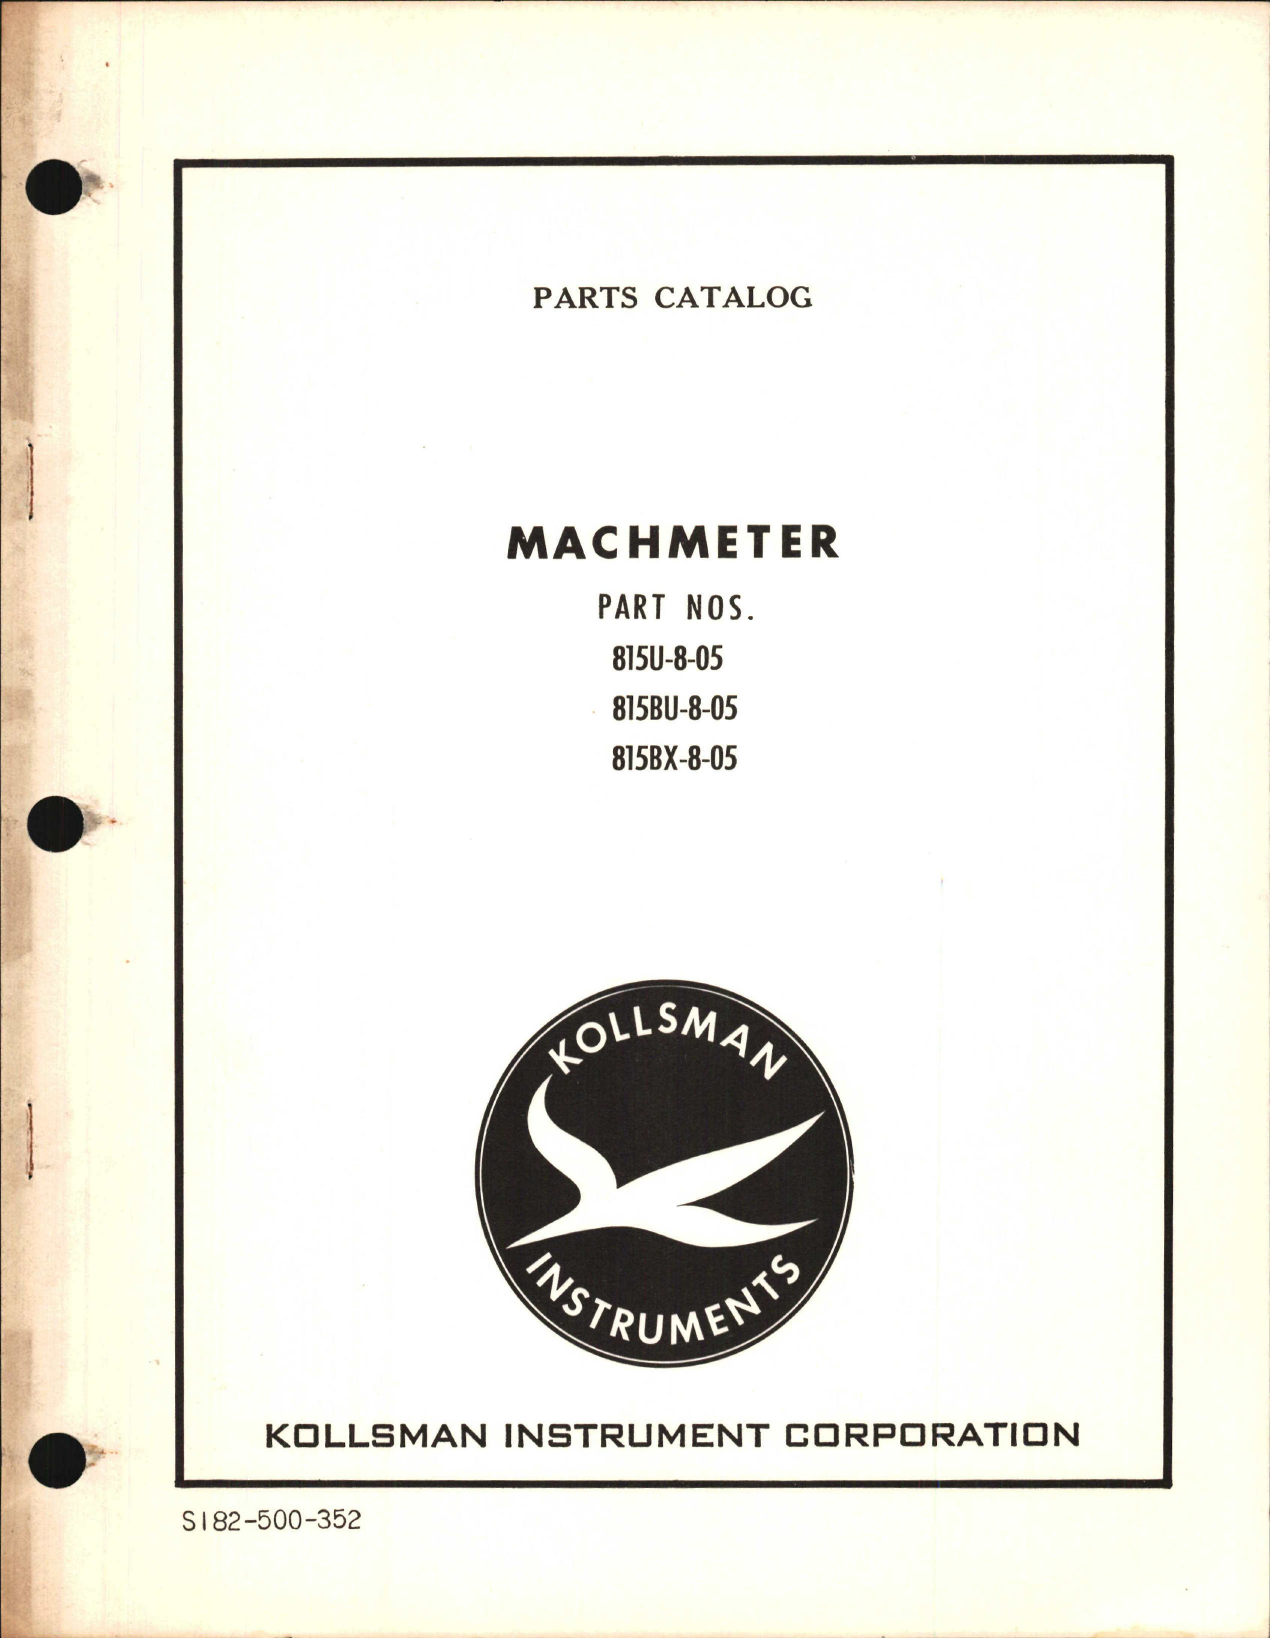 Sample page 1 from AirCorps Library document: Parts Catalog for Kollsman Machmeter